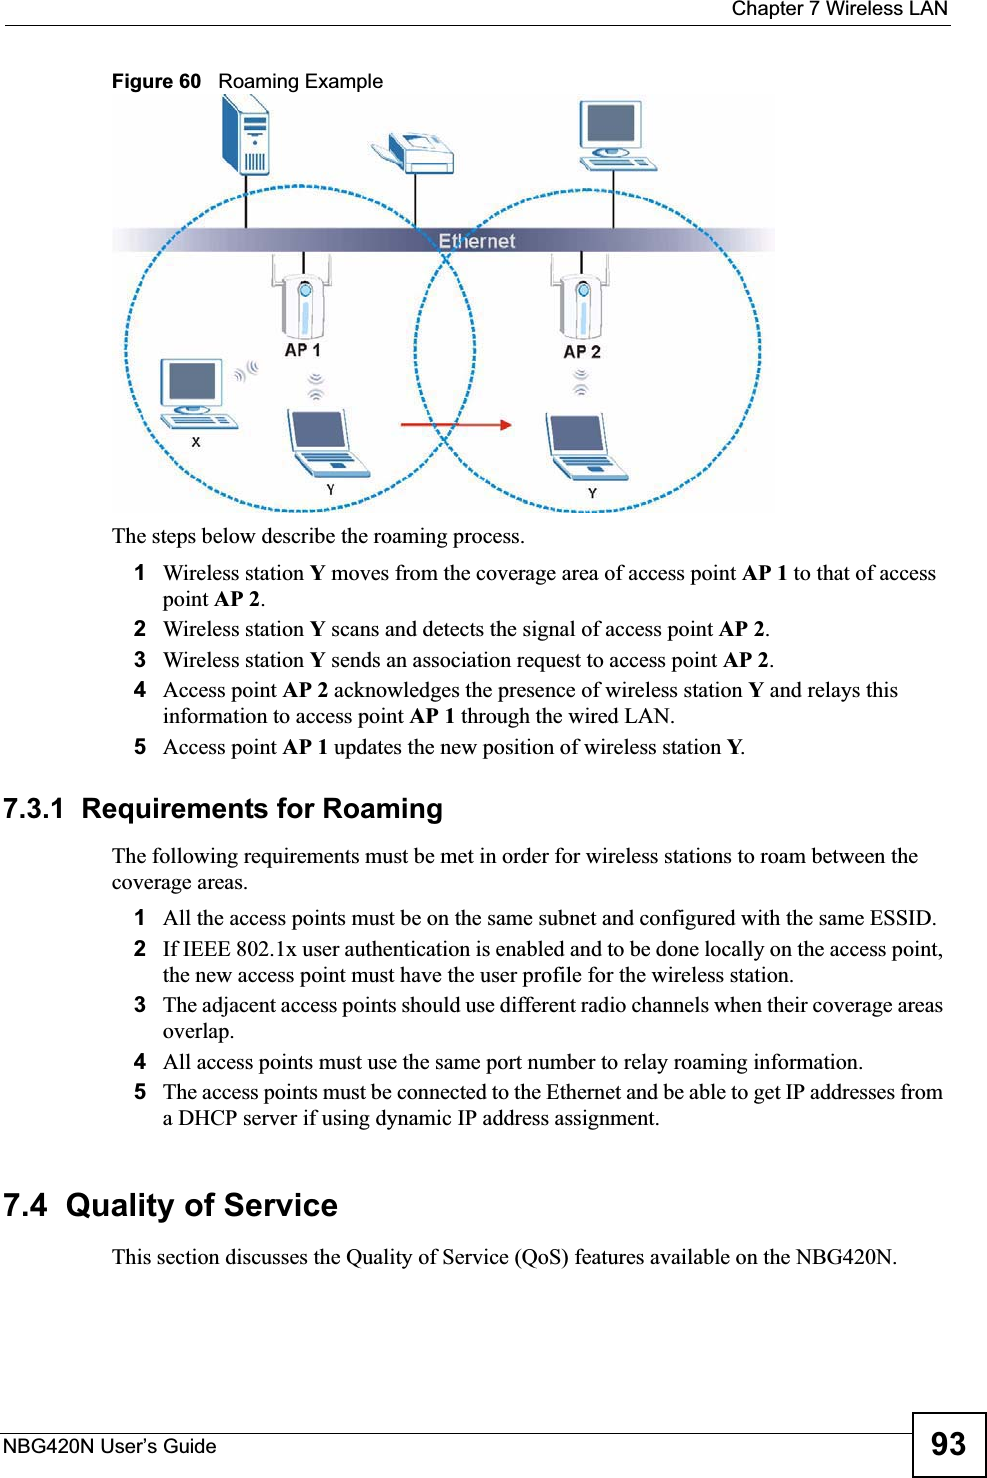  Chapter 7 Wireless LANNBG420N User’s Guide 93Figure 60   Roaming ExampleThe steps below describe the roaming process.1Wireless station Y moves from the coverage area of access point AP 1 to that of access point AP 2.2Wireless station Y scans and detects the signal of access point AP 2.3Wireless station Y sends an association request to access point AP 2.4Access point AP 2 acknowledges the presence of wireless station Y and relays this information to access point AP 1 through the wired LAN. 5Access point AP 1 updates the new position of wireless station Y.7.3.1  Requirements for RoamingThe following requirements must be met in order for wireless stations to roam between the coverage areas. 1All the access points must be on the same subnet and configured with the same ESSID. 2If IEEE 802.1x user authentication is enabled and to be done locally on the access point, the new access point must have the user profile for the wireless station.3The adjacent access points should use different radio channels when their coverage areas overlap. 4All access points must use the same port number to relay roaming information. 5The access points must be connected to the Ethernet and be able to get IP addresses from a DHCP server if using dynamic IP address assignment. 7.4  Quality of ServiceThis section discusses the Quality of Service (QoS) features available on the NBG420N.